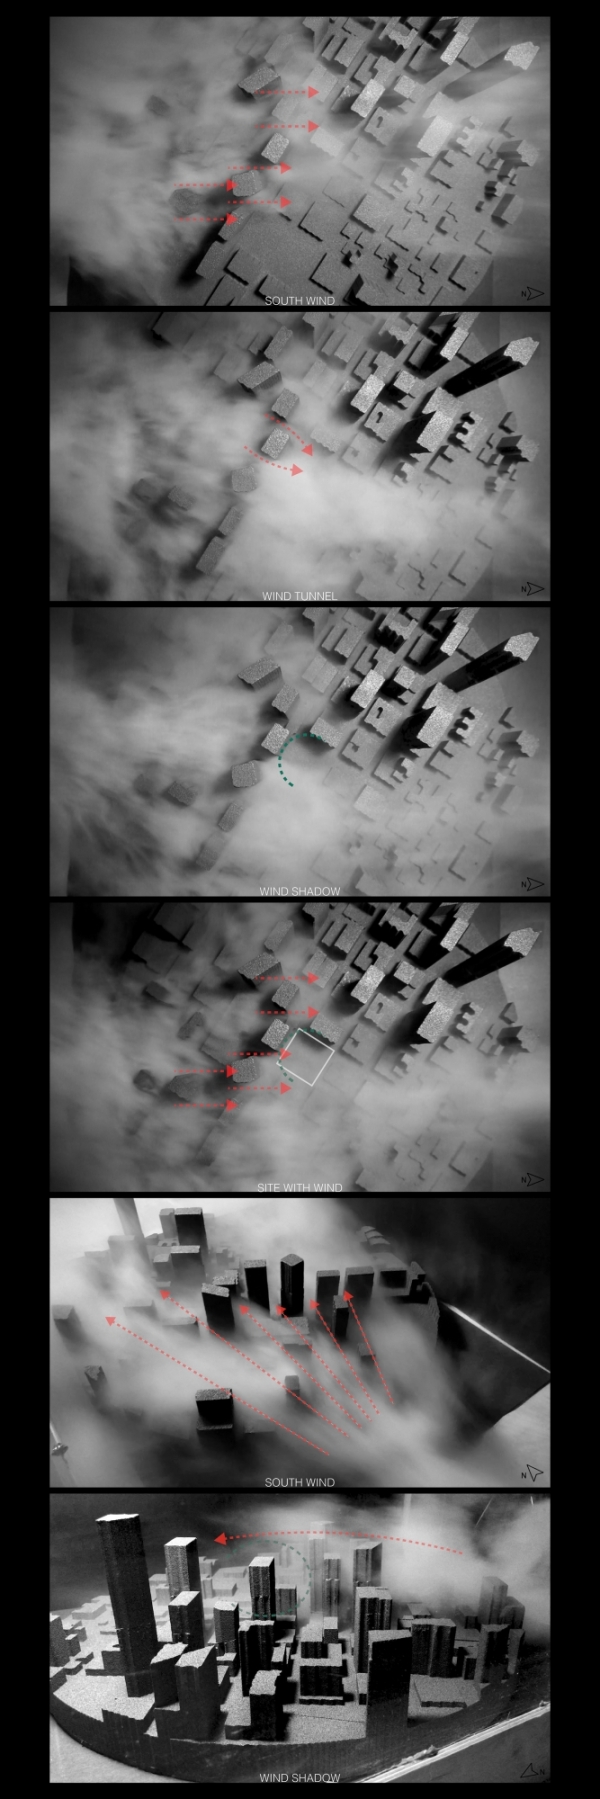 Images of air flow pattern study, using dry ice fog in the physical model.